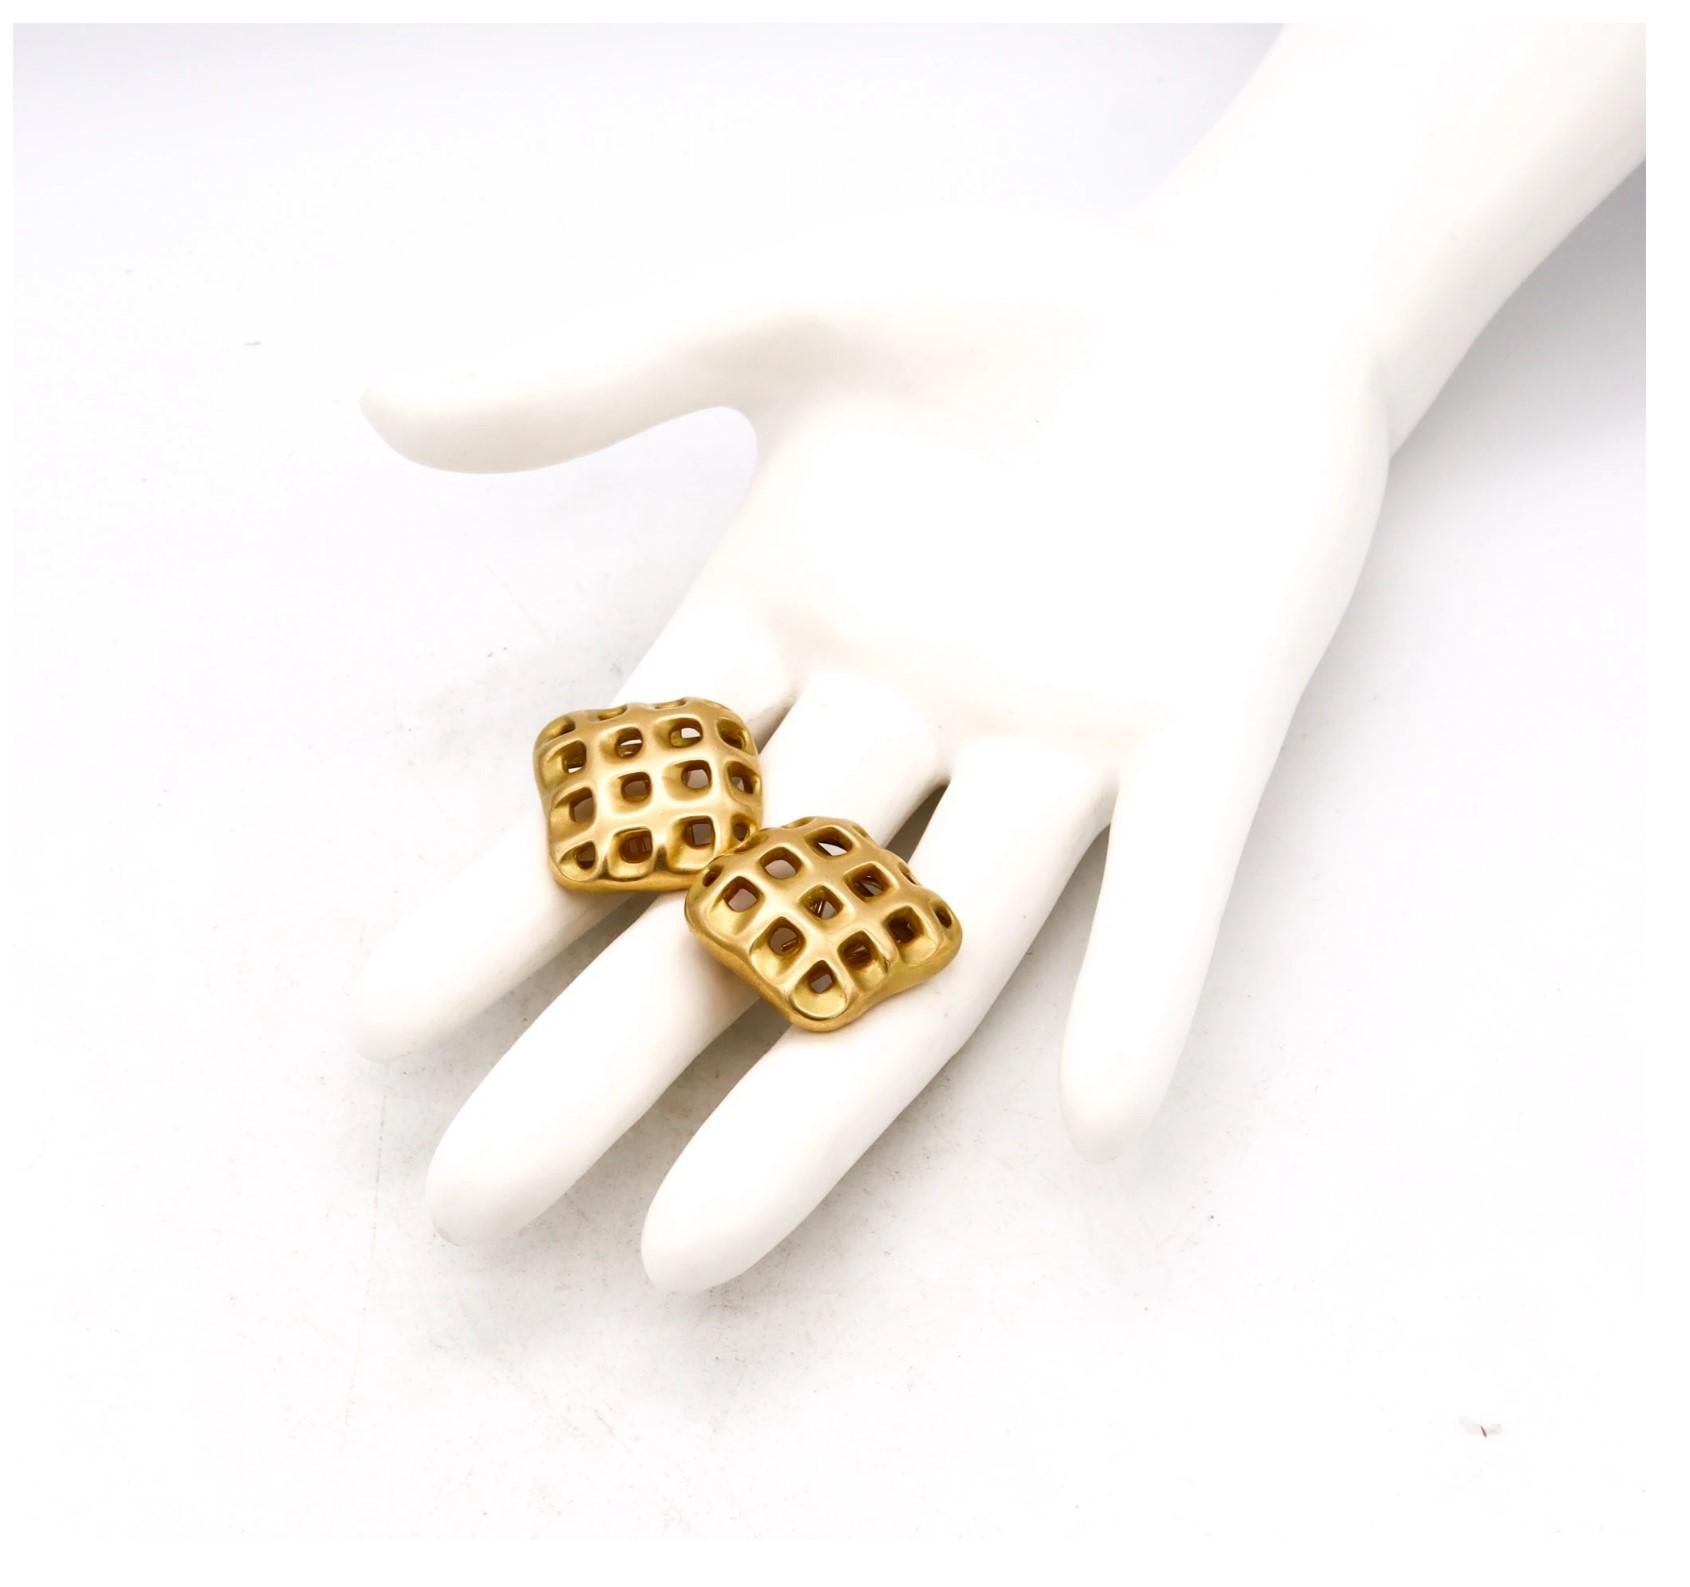 Women's Angela Cummings 1987 New York Studios Perforations Earrings In Solid 18Kt Gold For Sale